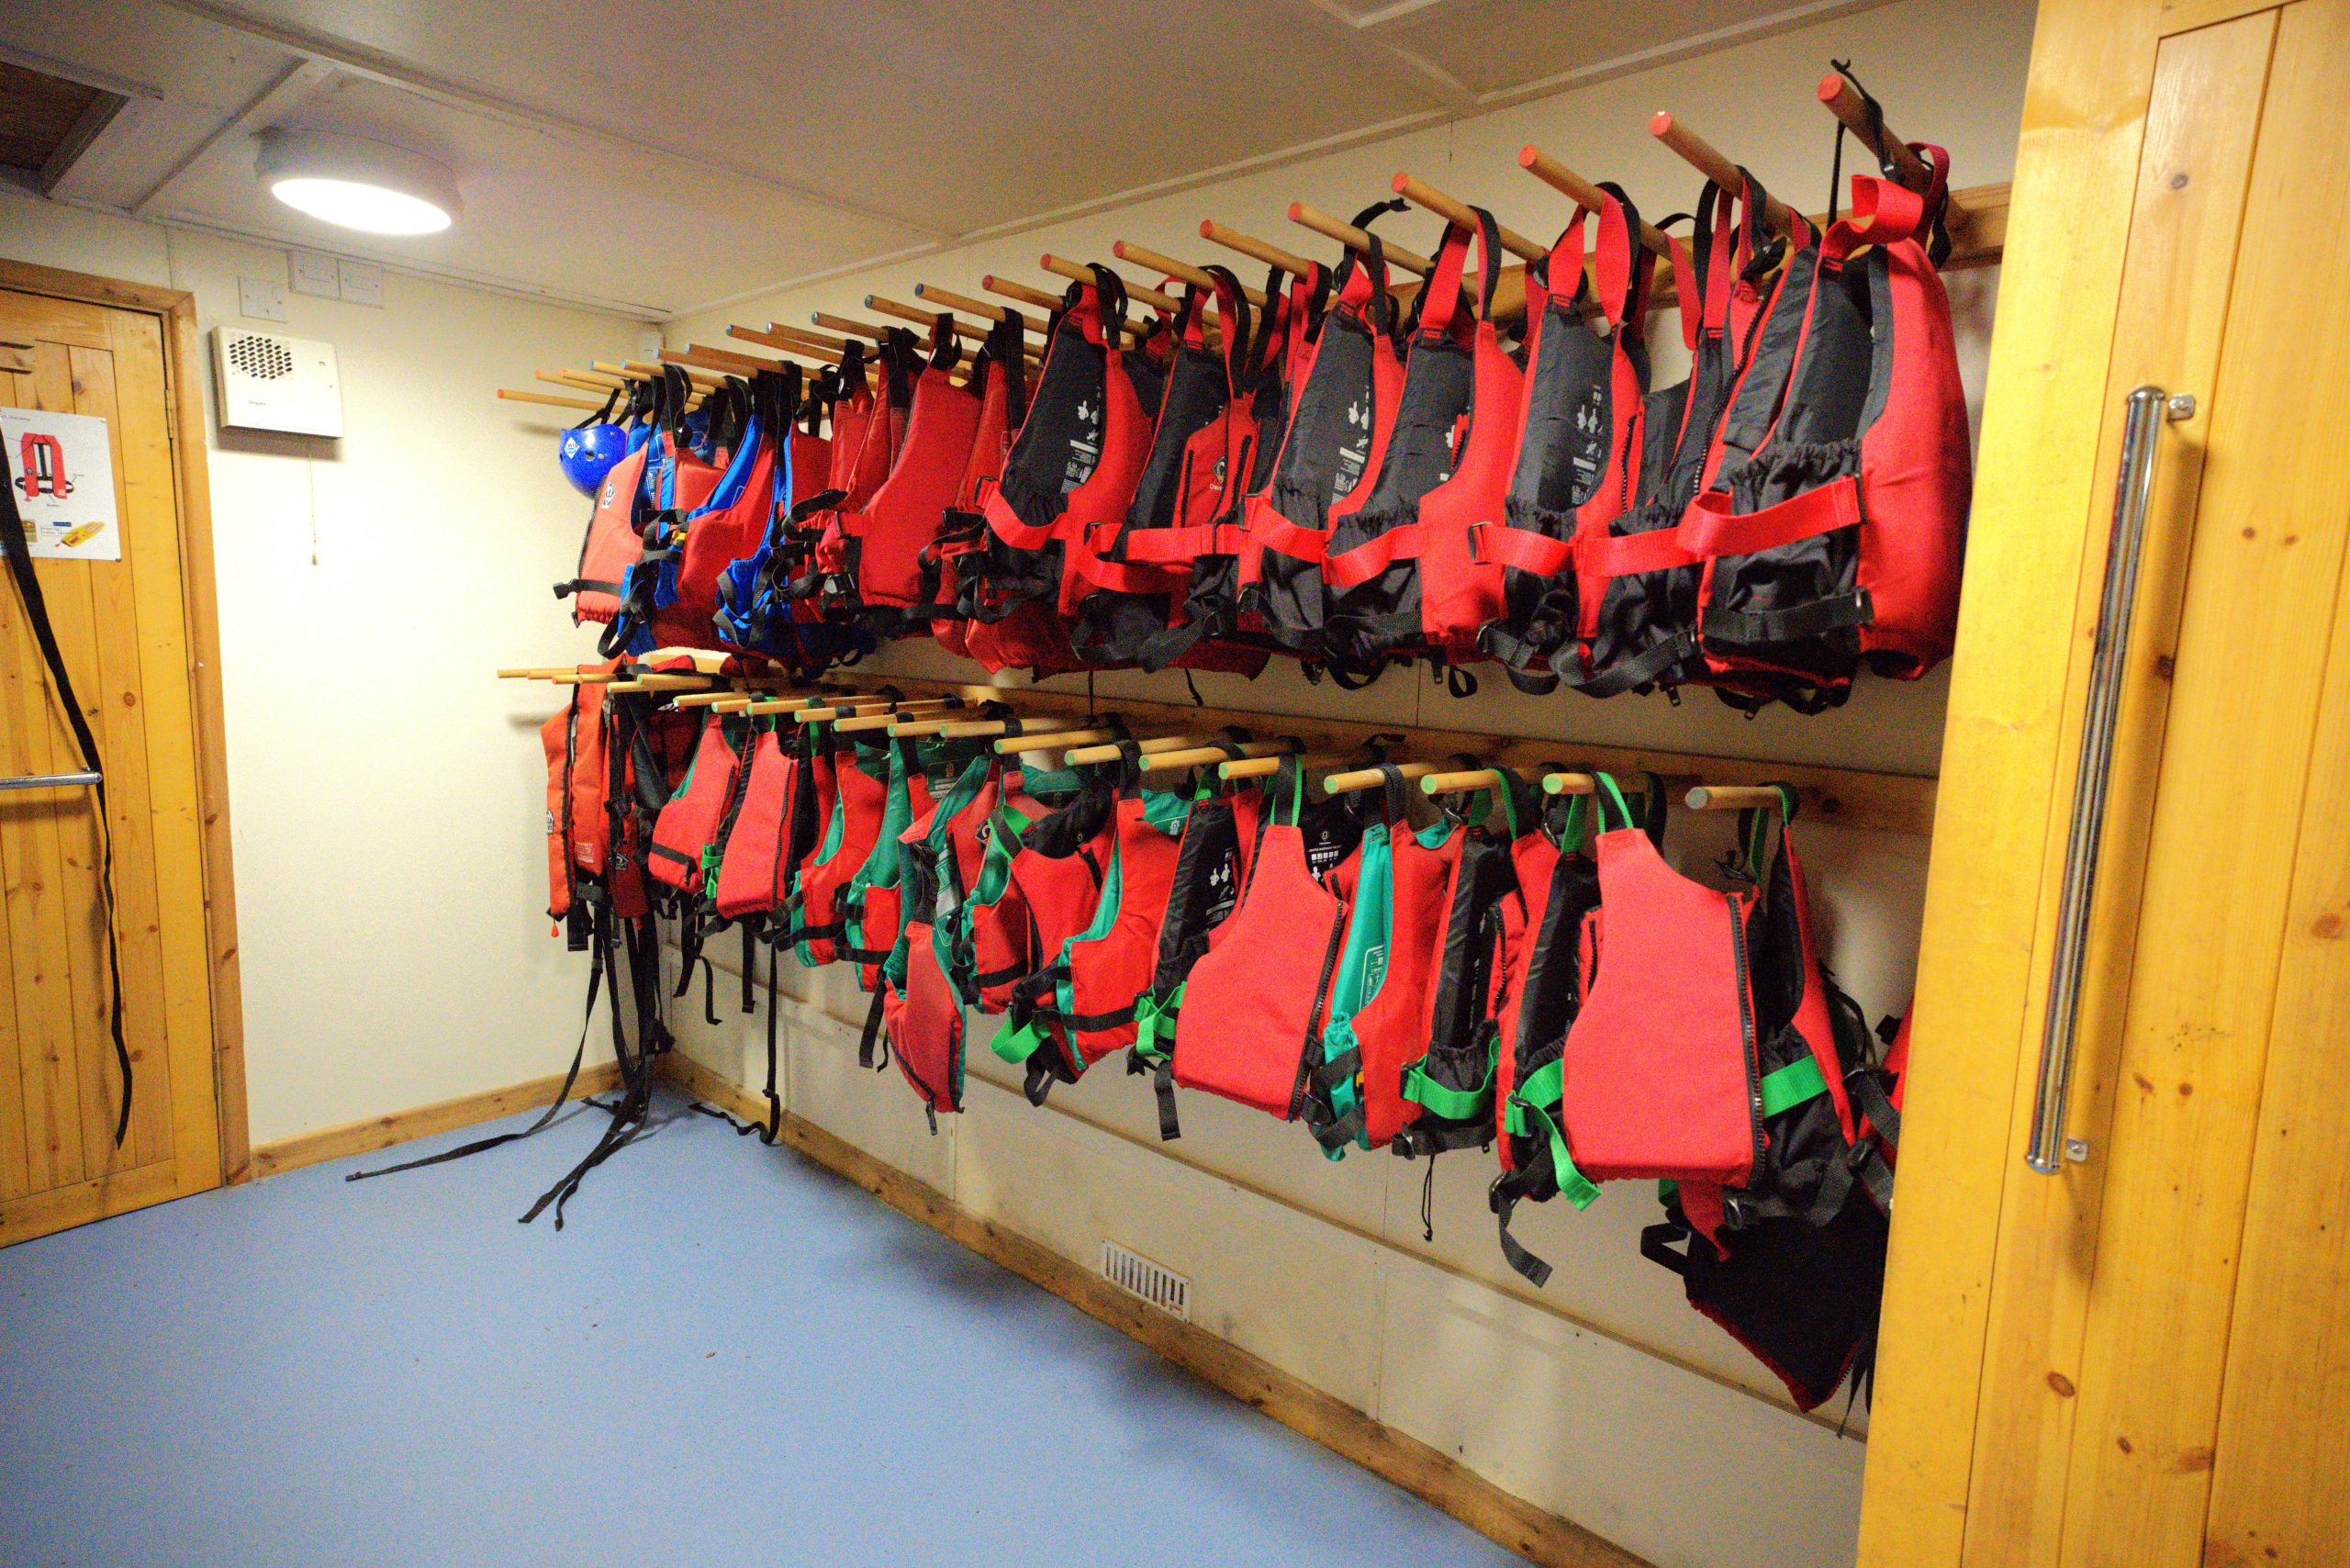 A large selection of red buoyancy aids lined up on pegged shelving in between two wooden doors inside a brightly lit room.